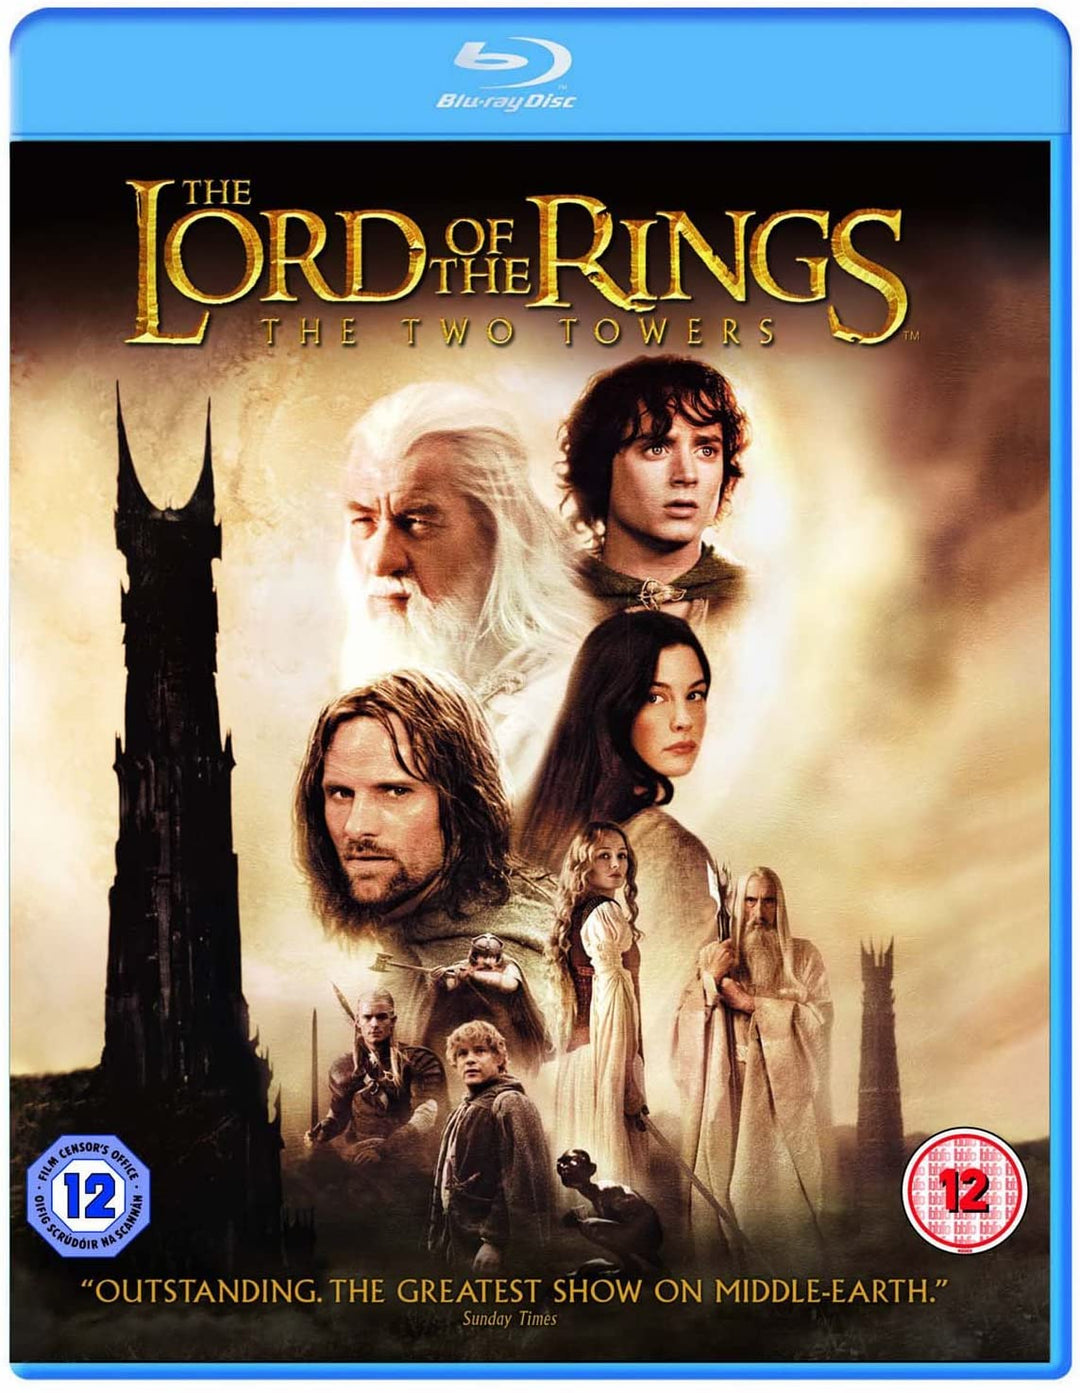 Lord Of The Rings - The Two Towers (Theatrical Version) - Fantasy/Adventure [Blu-ray]